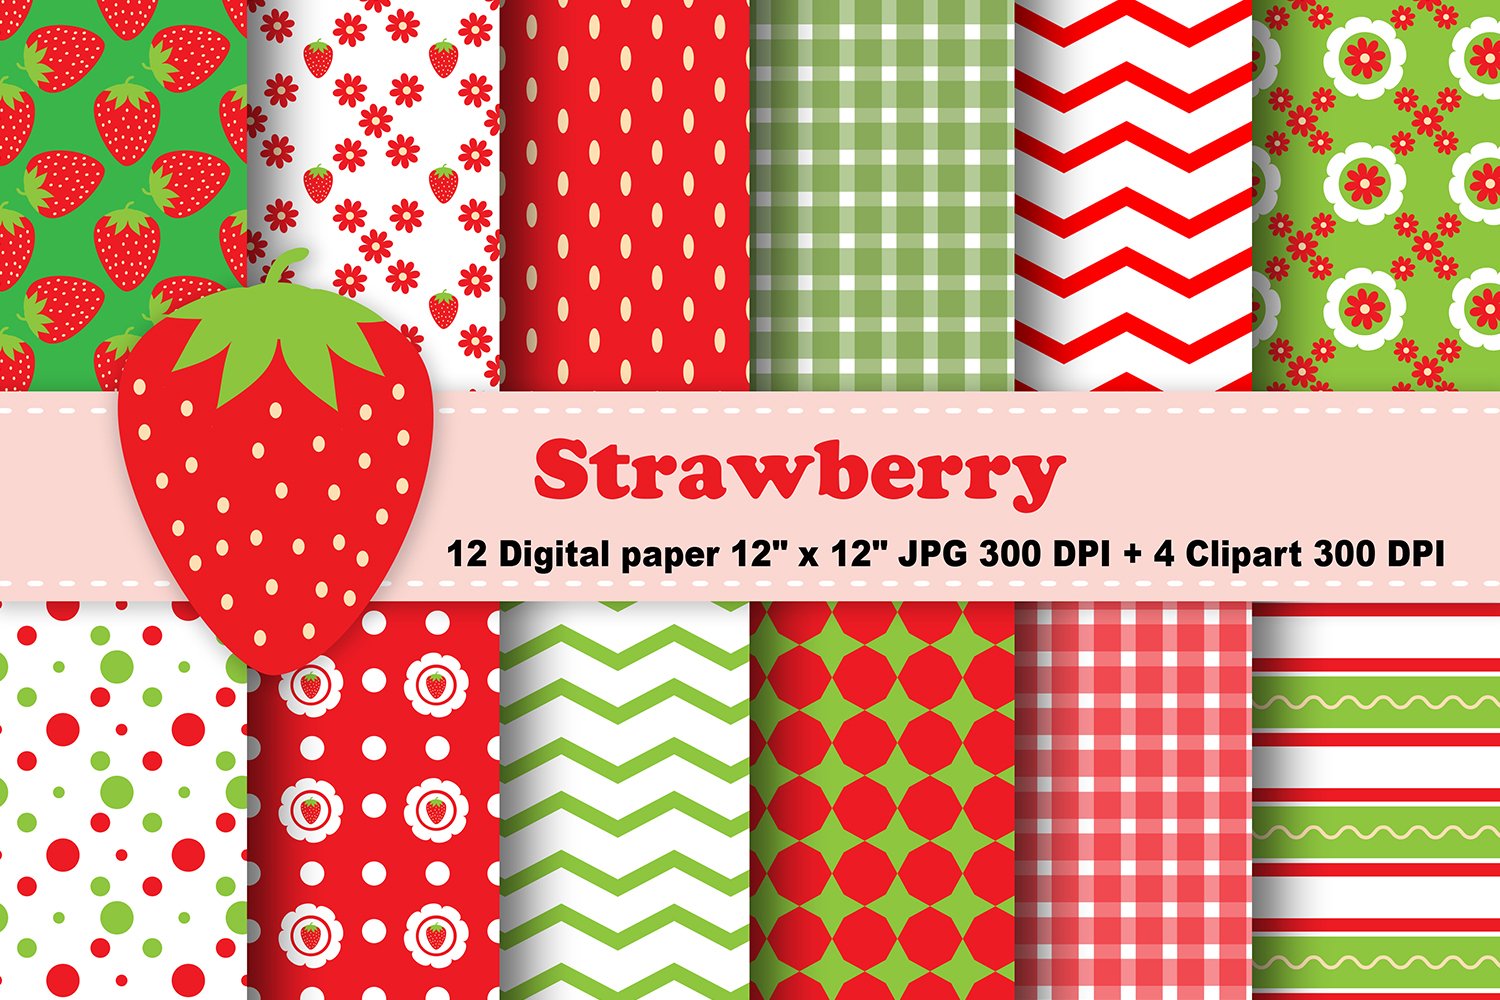 Cover image of Strawberry Digital Paper, Fruits Background.